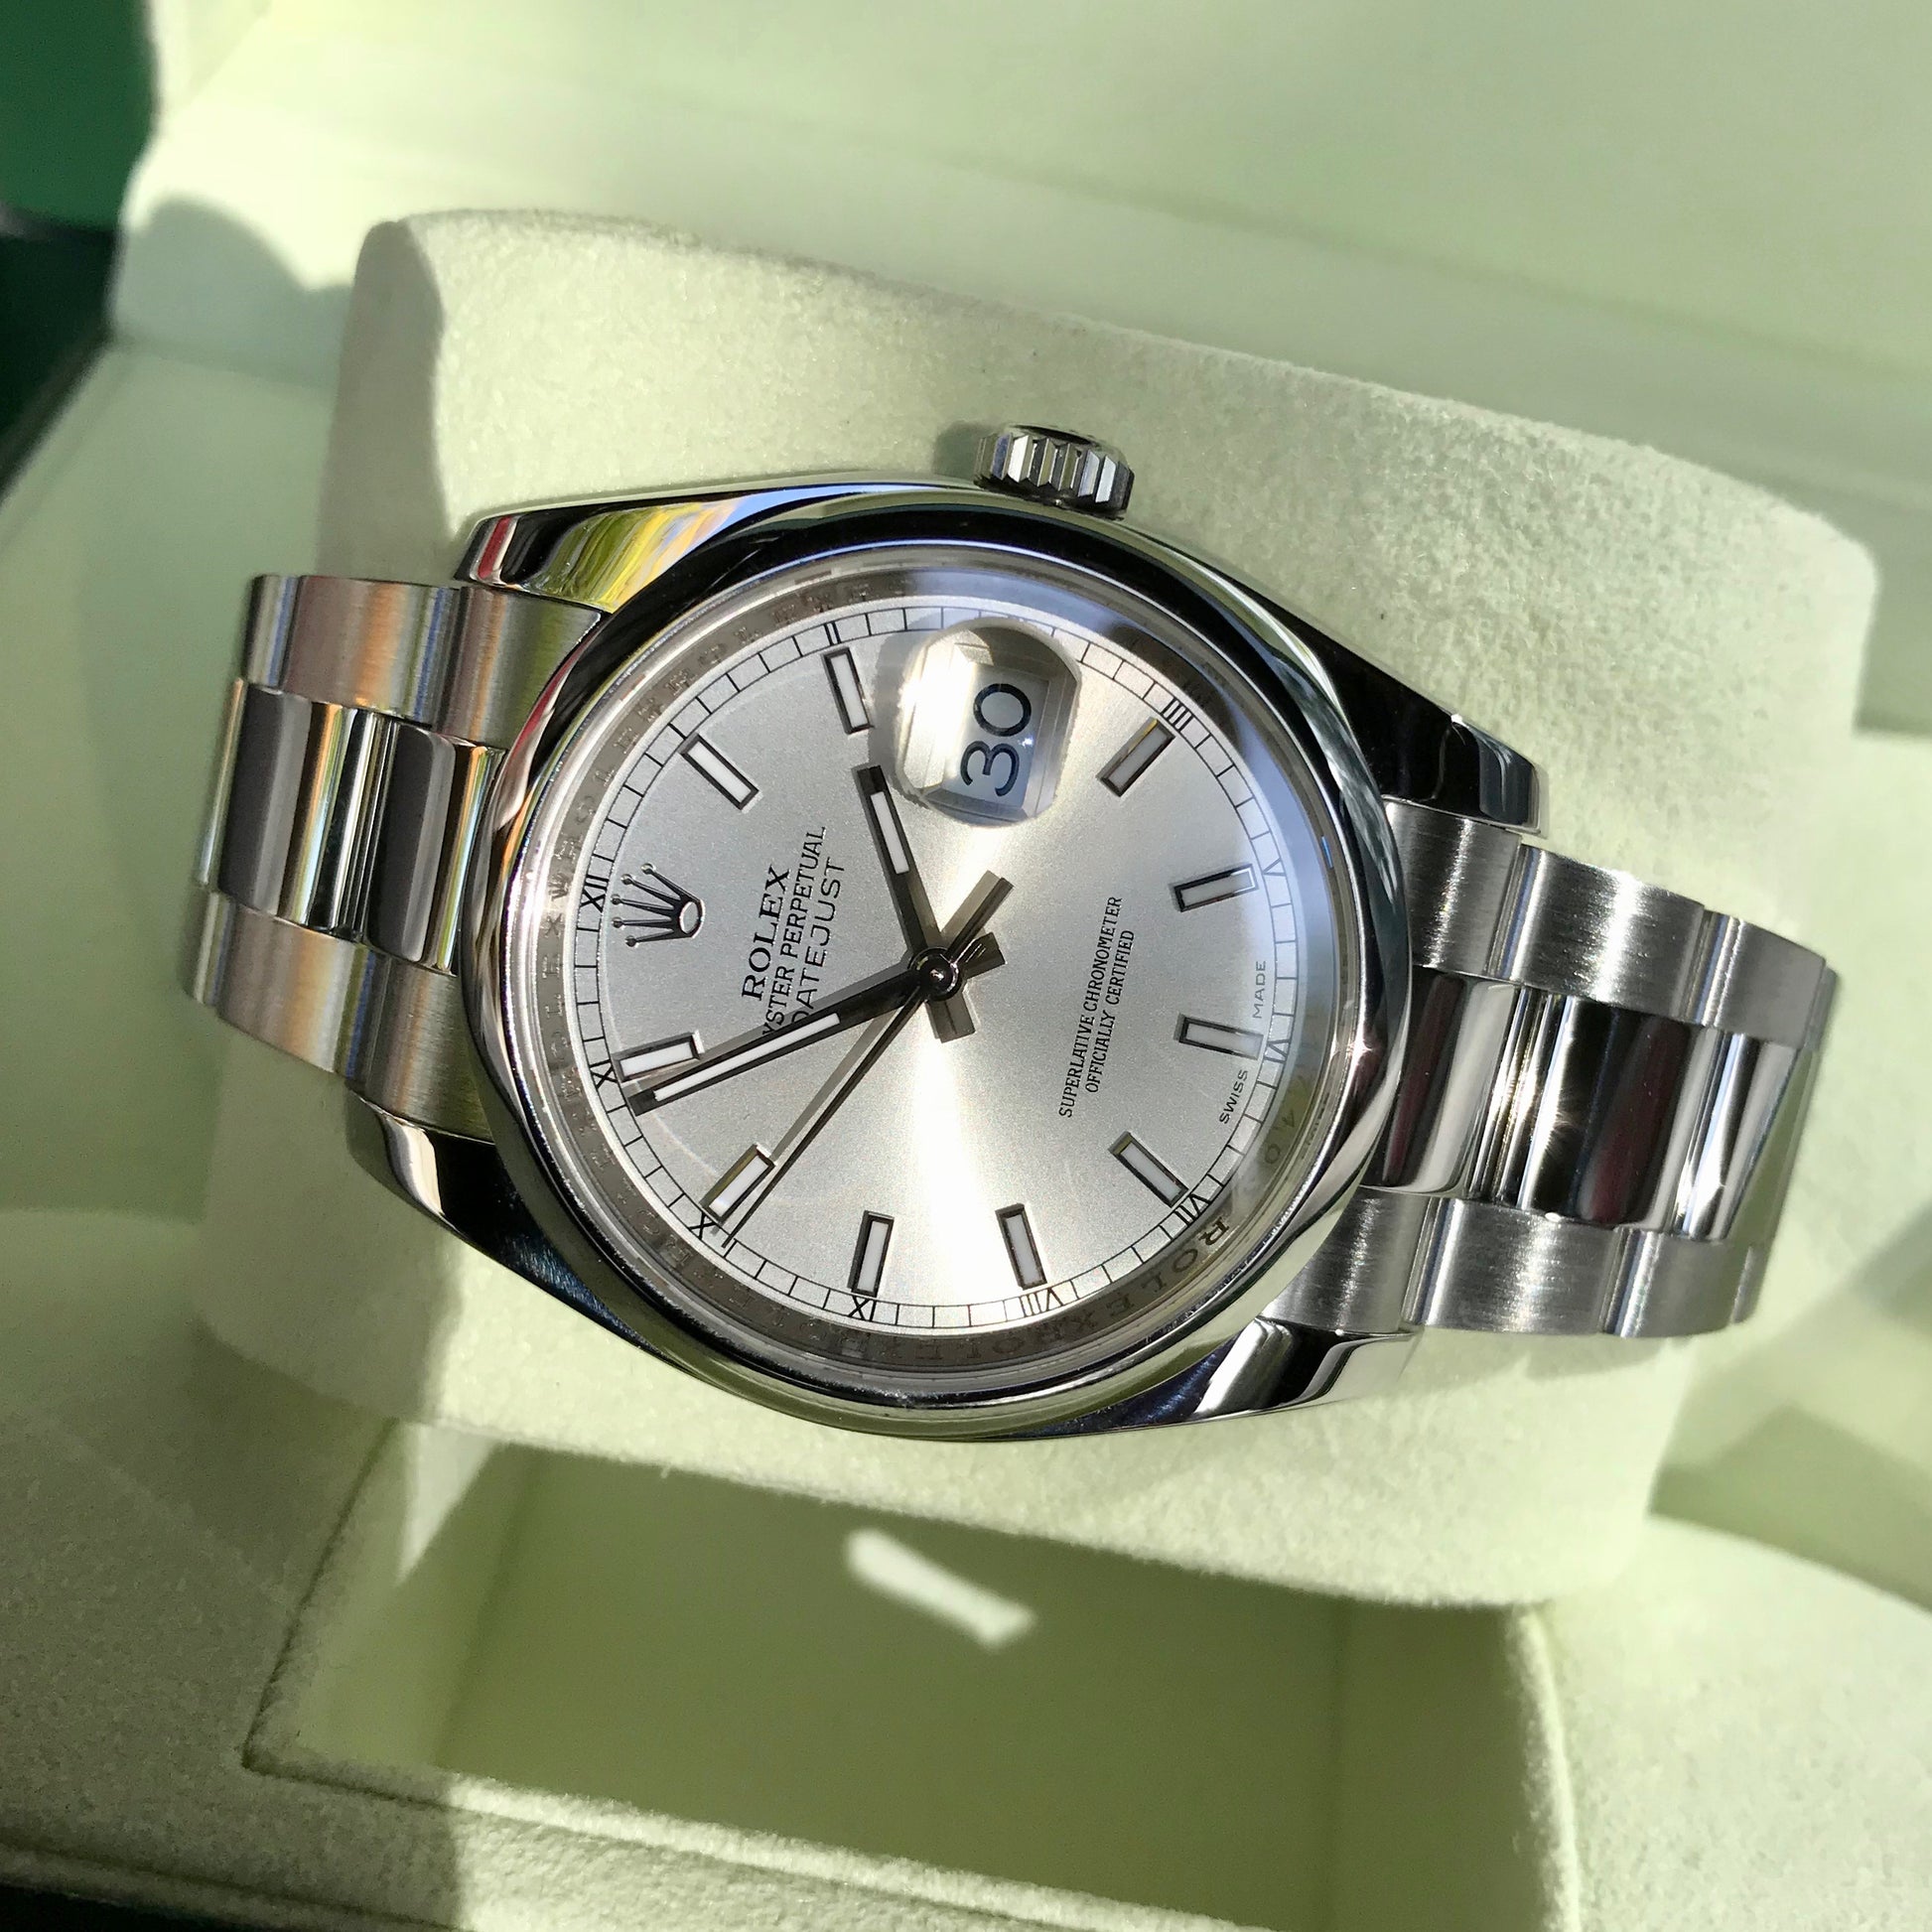 Rolex Datejust 116200 Oyster Perpetual Silver Stick Automatic Caliber 3135 Wristwatch - Hashtag Watch Company